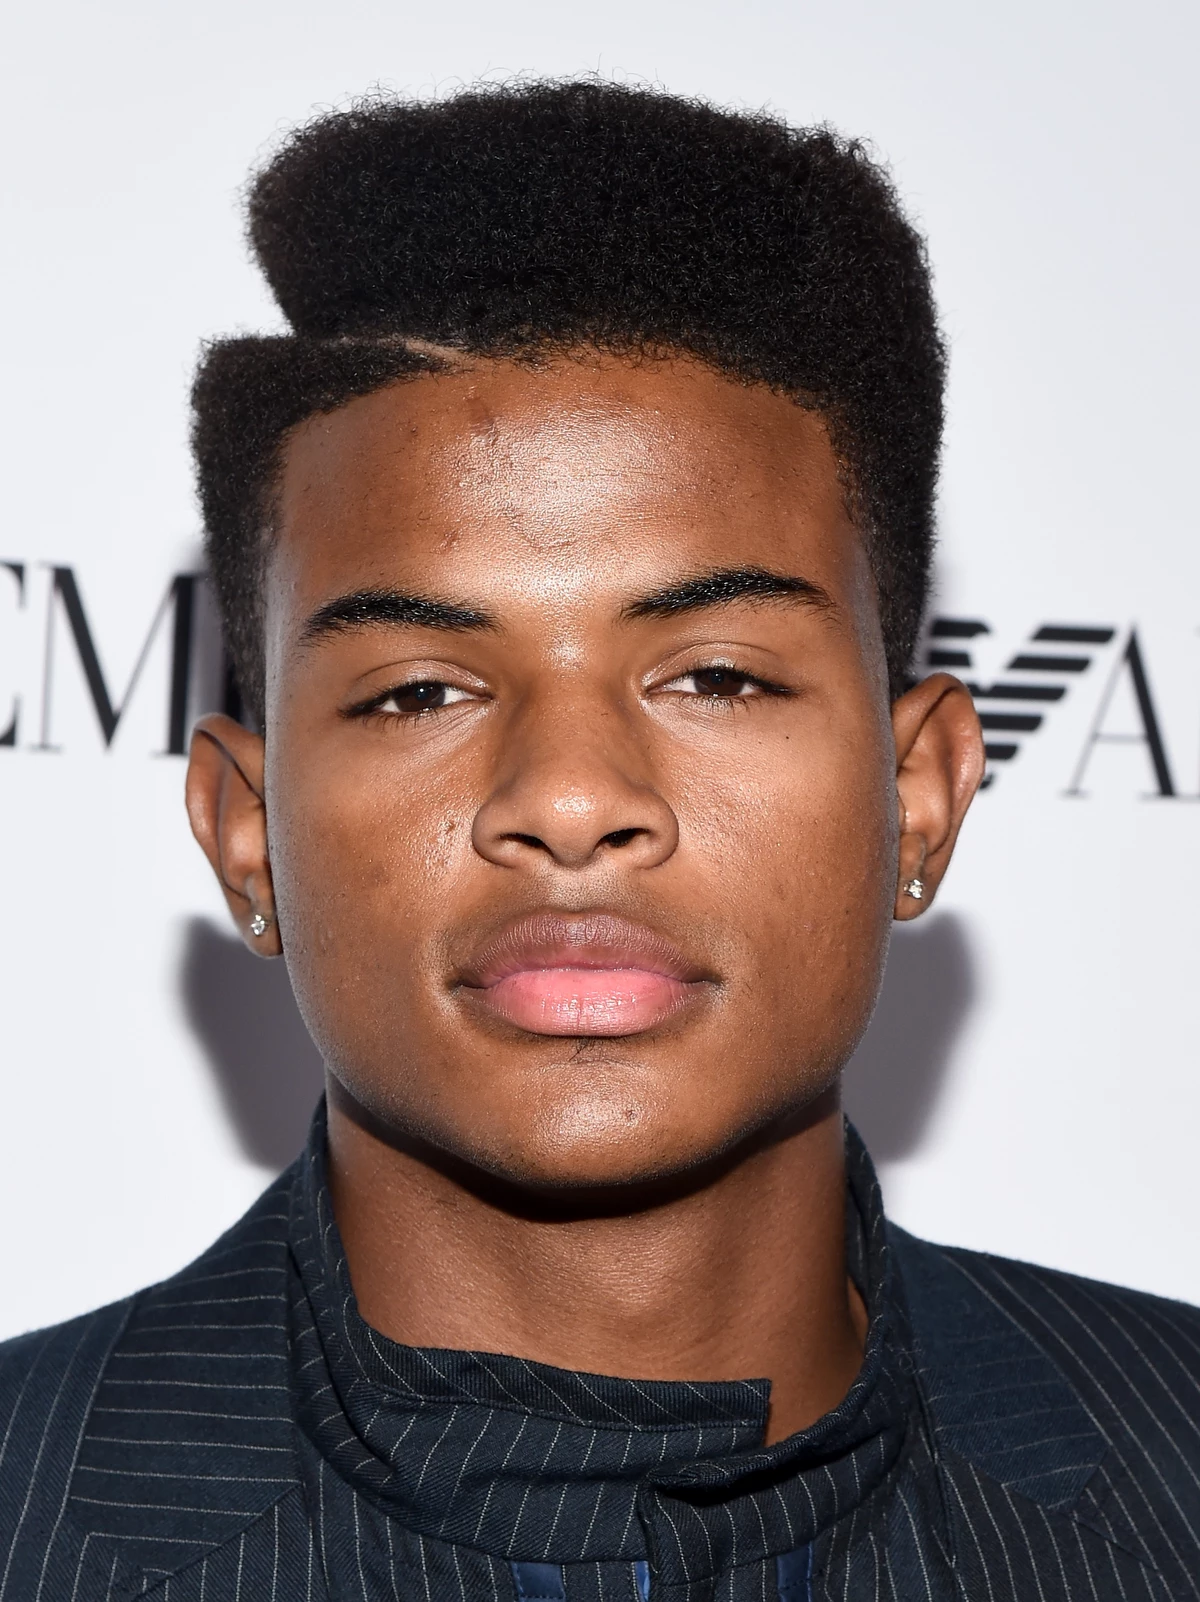 Trevor Jackson Drops A New Single “Simple As This” [VIDEO]